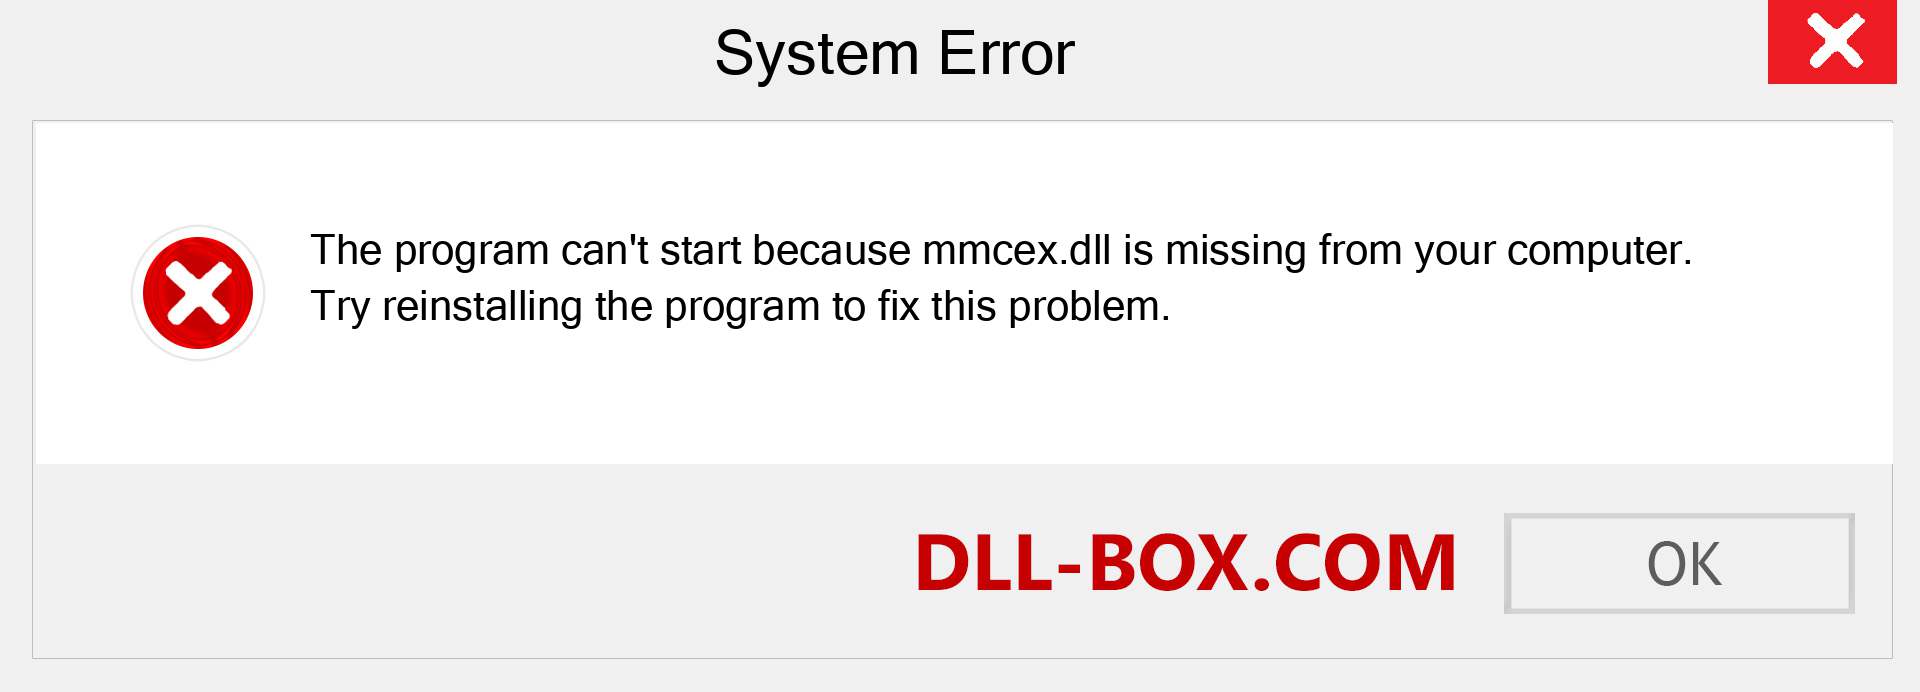  mmcex.dll file is missing?. Download for Windows 7, 8, 10 - Fix  mmcex dll Missing Error on Windows, photos, images